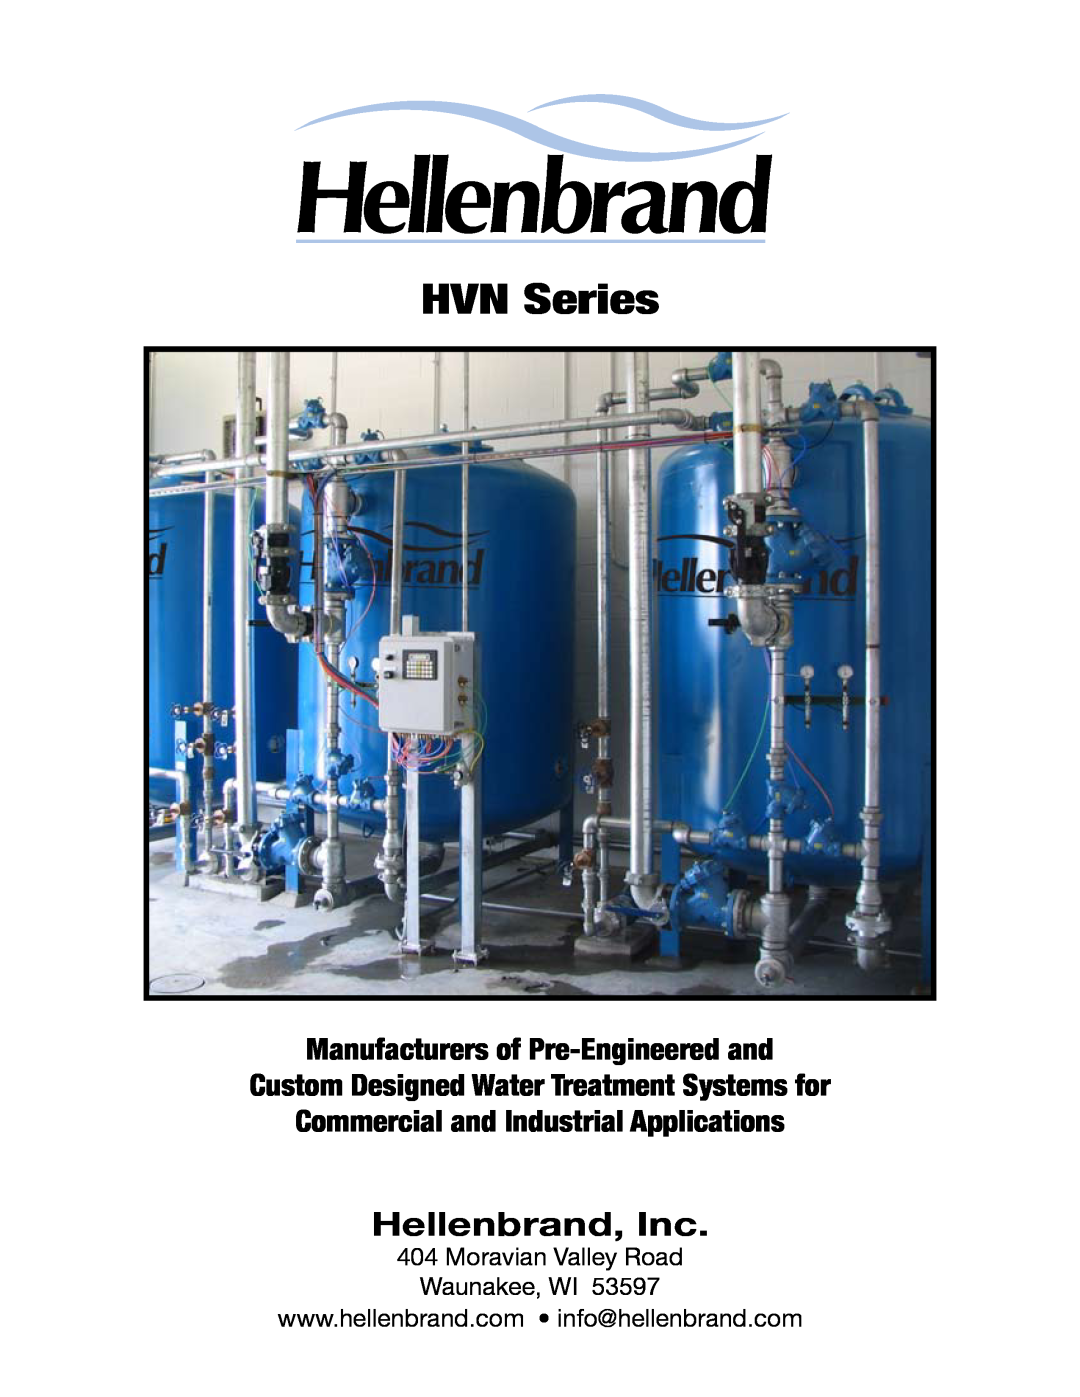 Hellenbrand HVN Series manual Hellenbrand, Inc, Manufacturers of Pre-Engineered and, Moravian Valley Road Waunakee, WI 